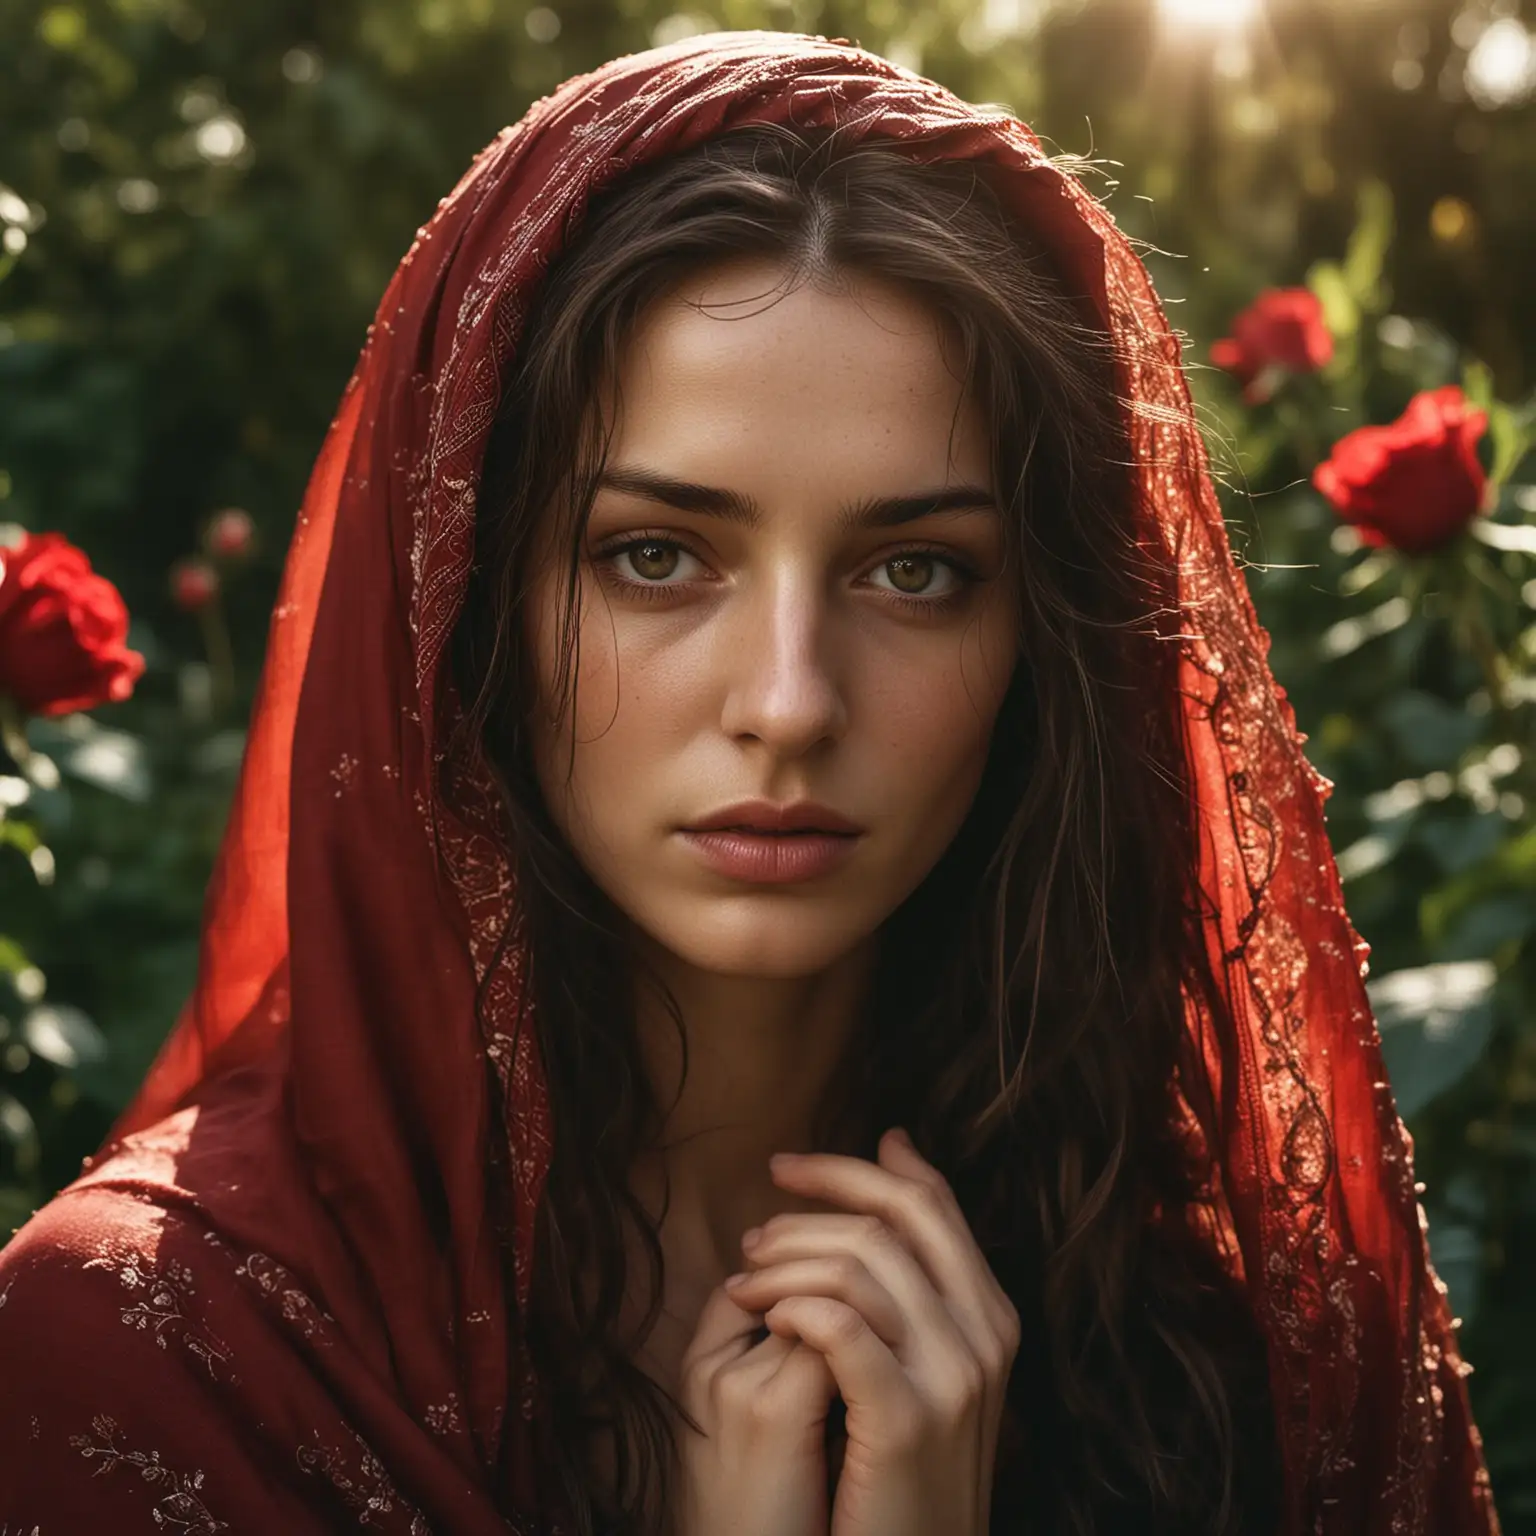 Emotive Mary Magdalene Portrait with Red Headscarf in Studio Setting